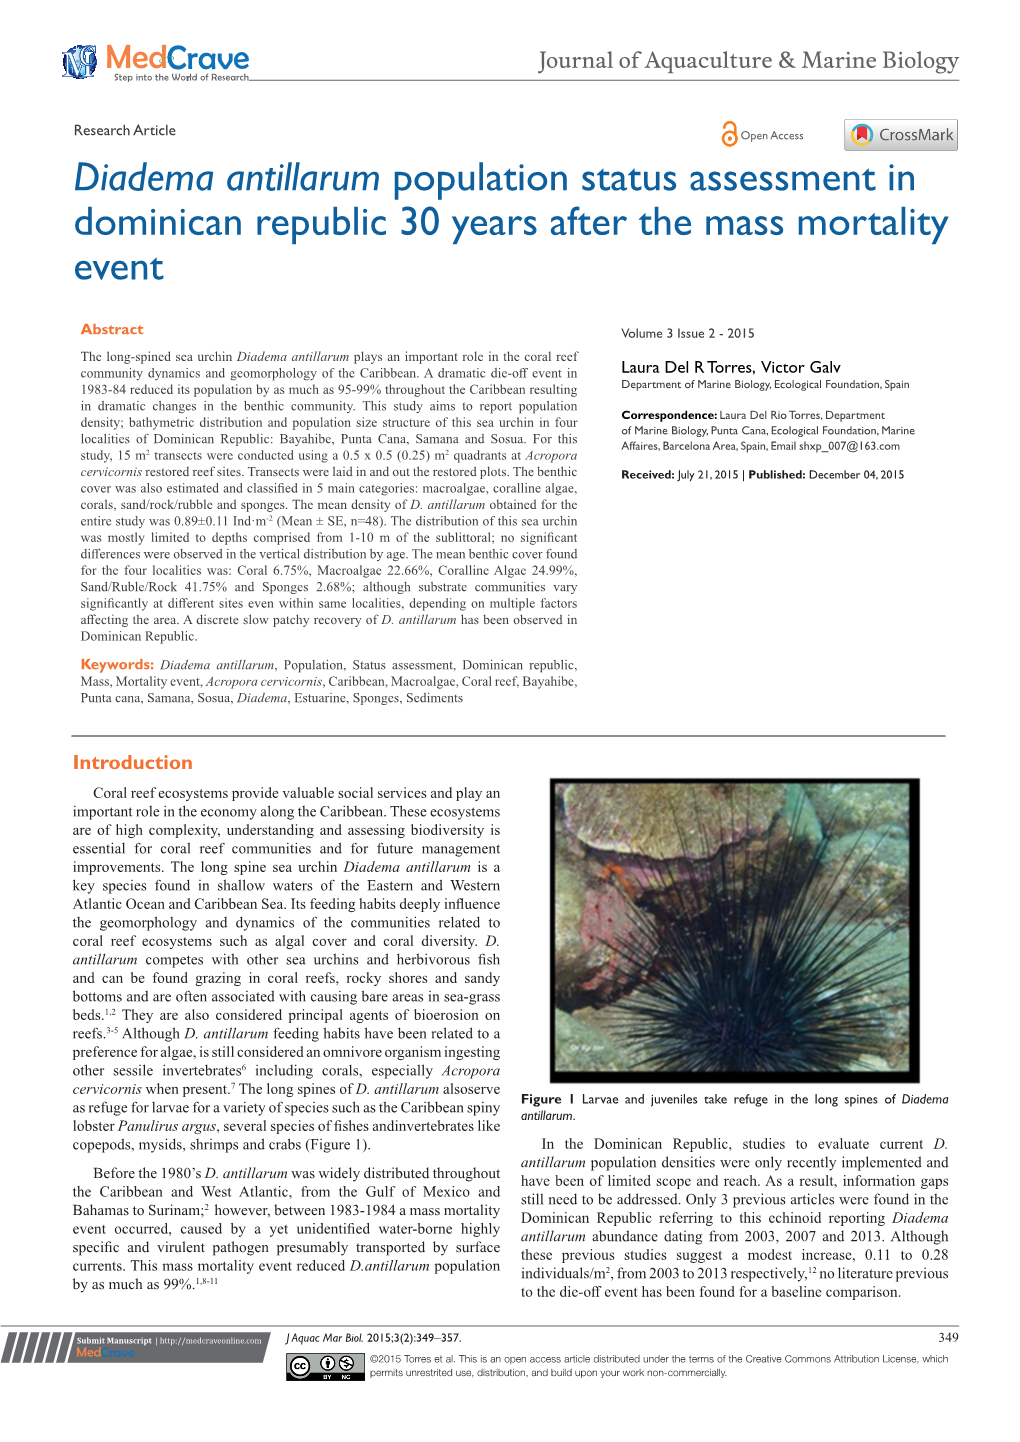 Diadema Antillarum Population Status Assessment in Dominican Republic 30 Years After the Mass Mortality Event